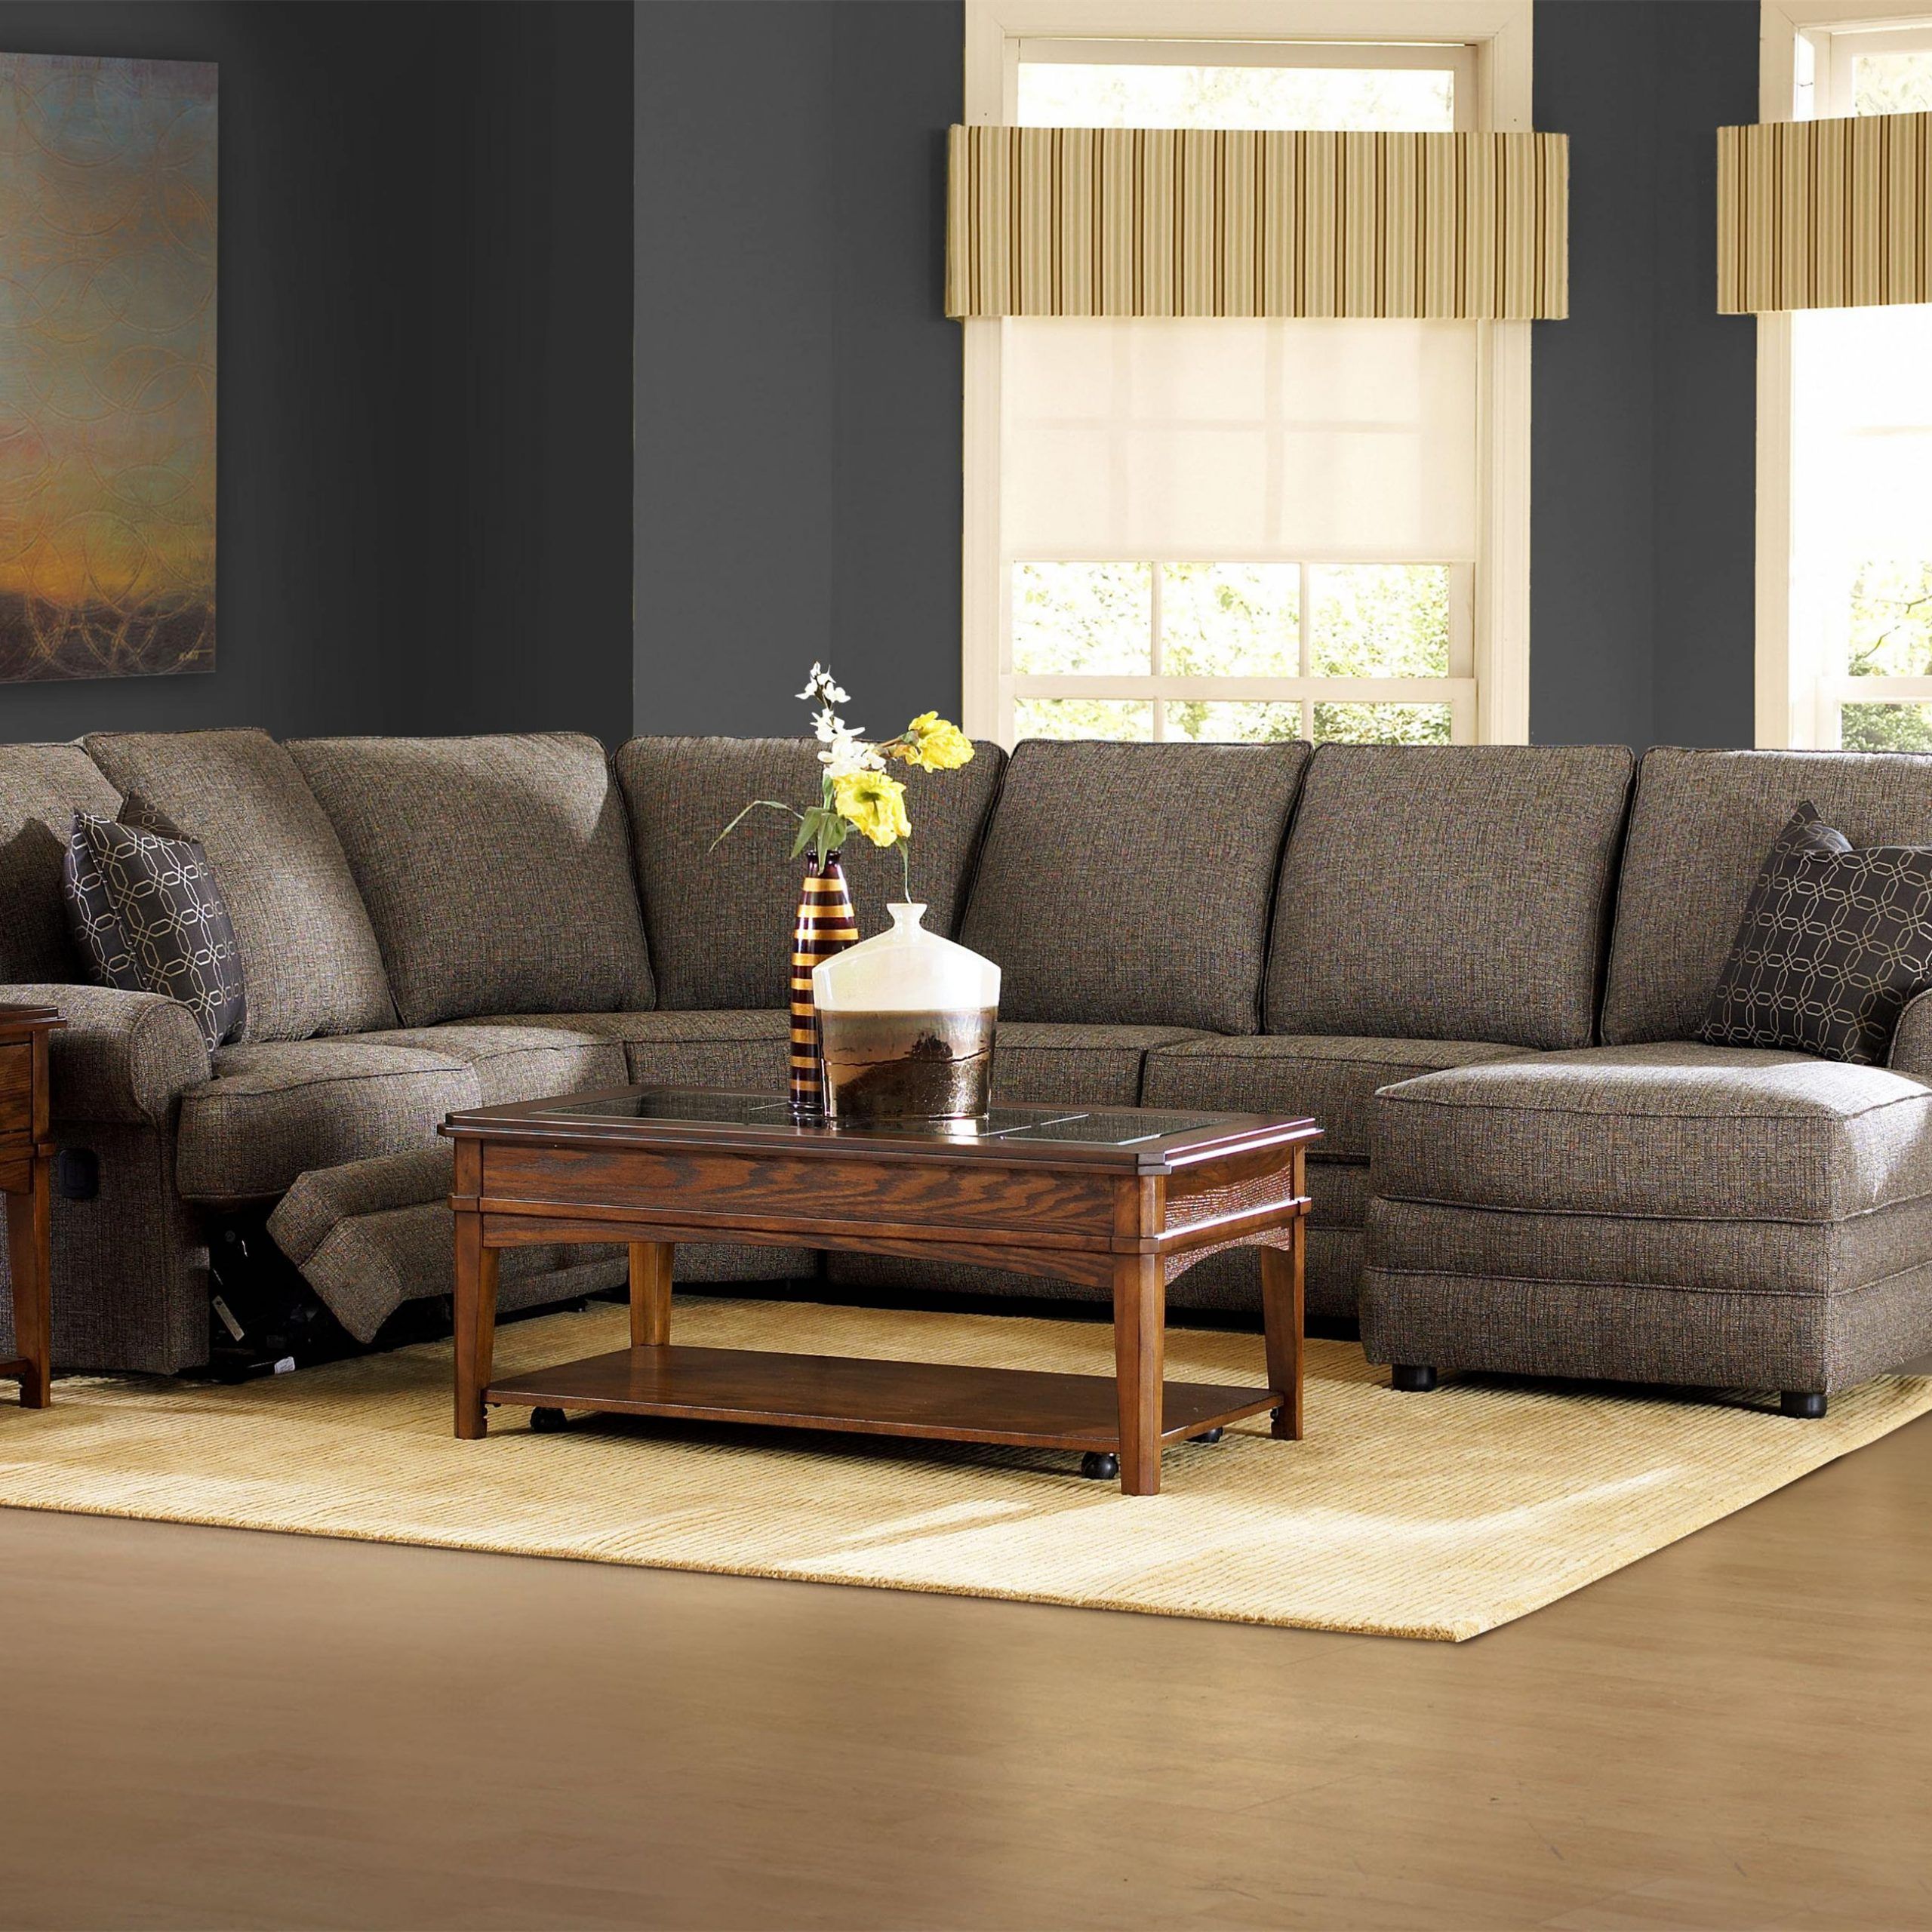 2018 Hannah Left Sectional Sofas Inside Klaussner Belleview Reclining Sectional With Left Side (View 24 of 25)